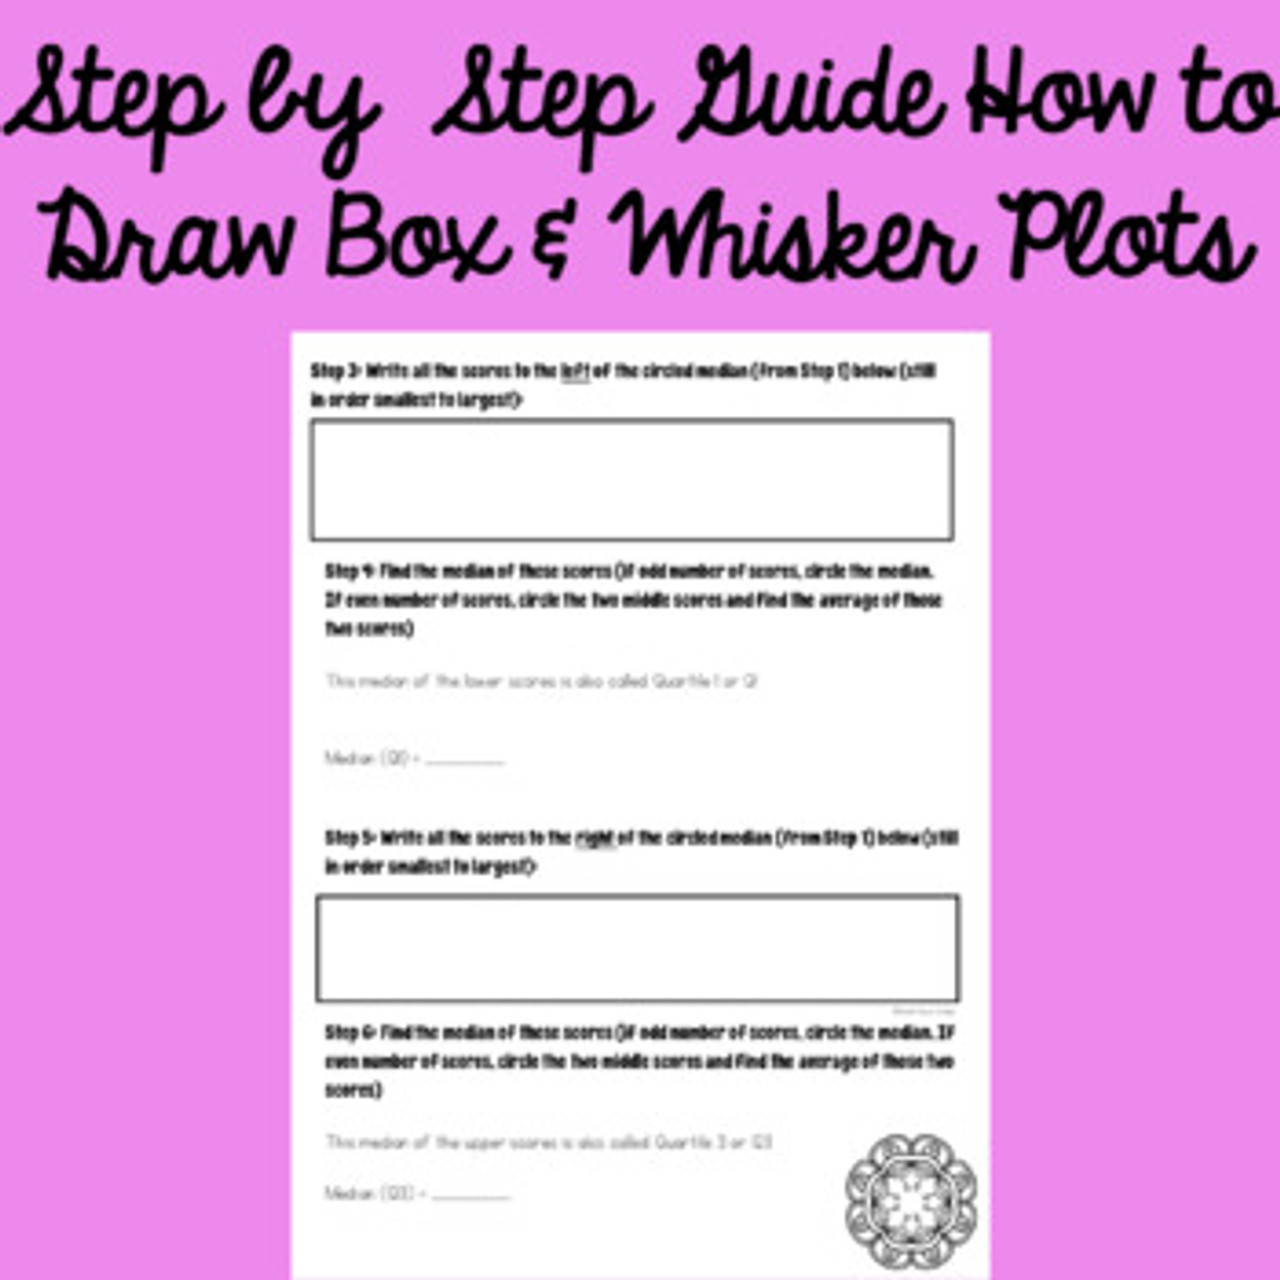 Drawing Box and Whisker Plots Investigation + Practice